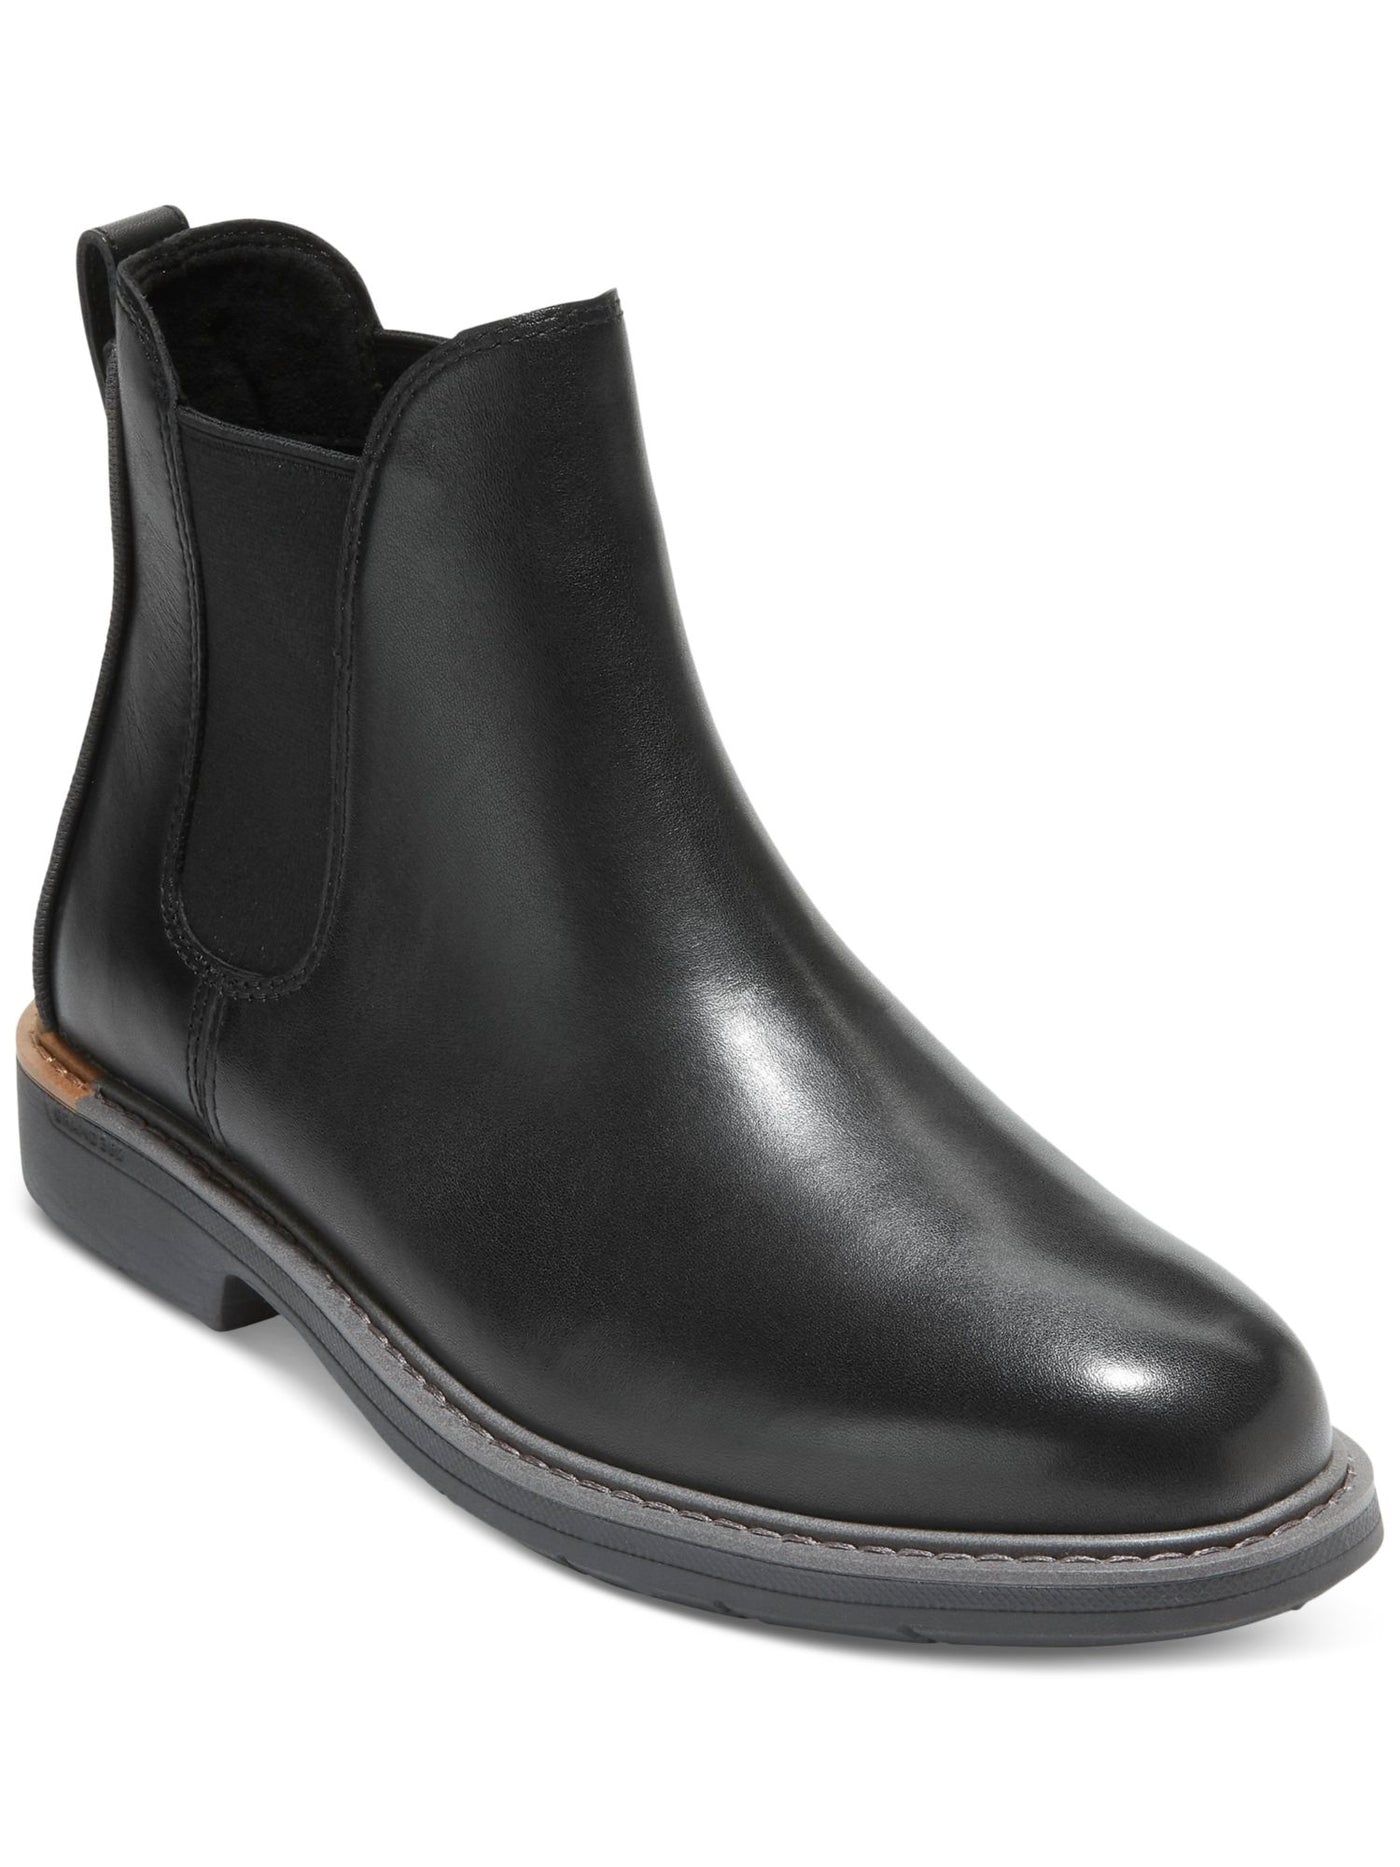 COLE HAAN GRANDSERIES Mens Black Pull Tab Goring Cushioned Go-to Round Toe Block Heel Leather Chelsea 8 M